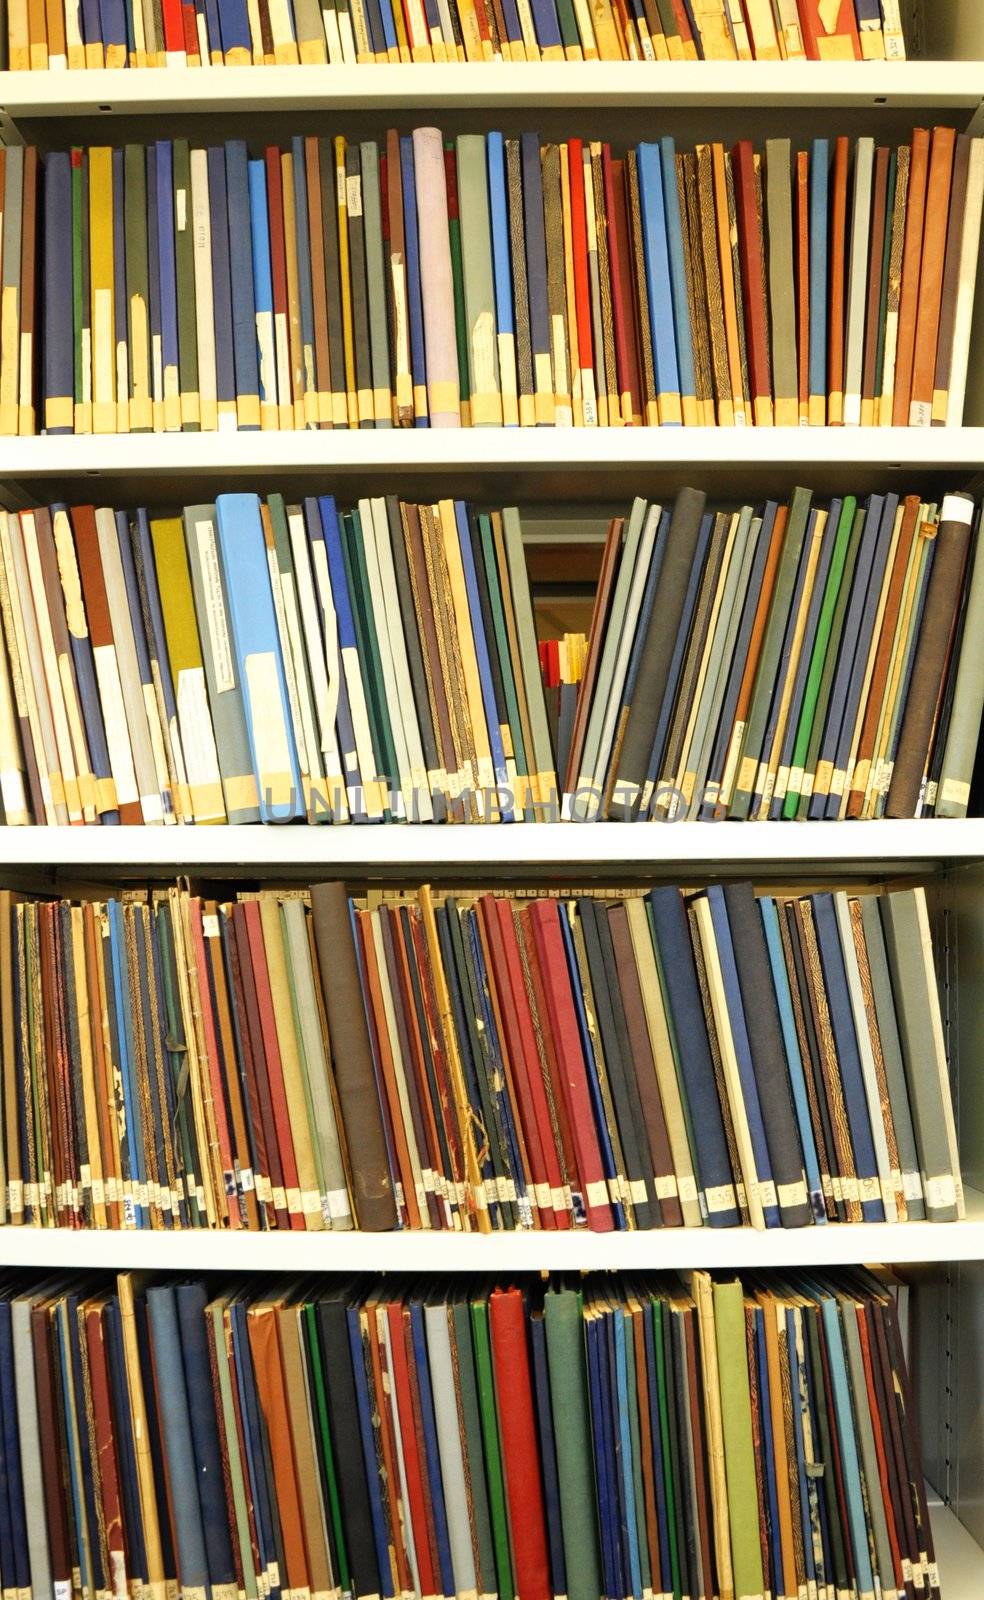 education books in a library showing school or university concept